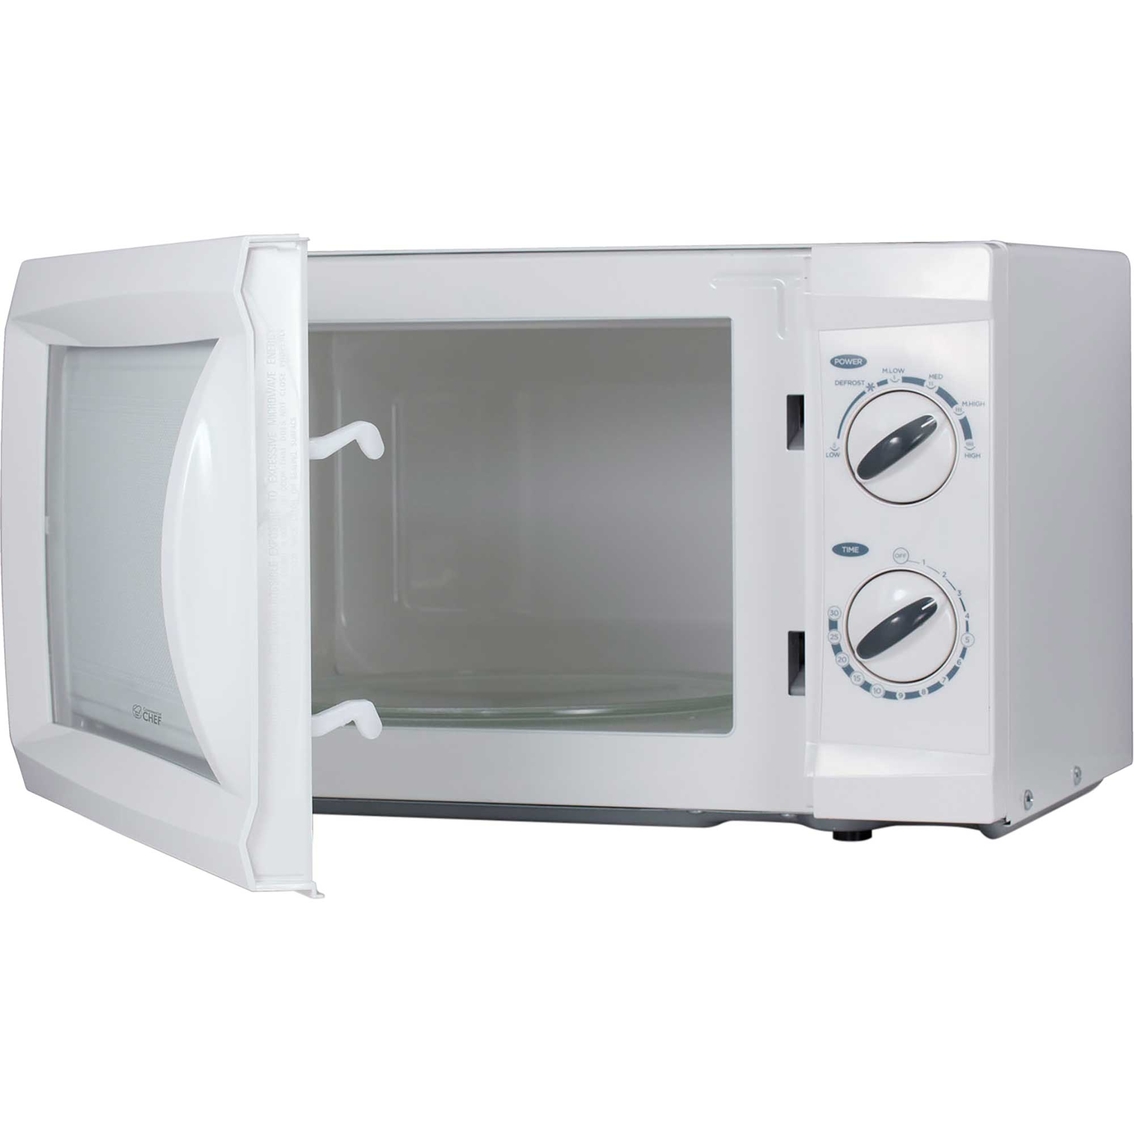 Commercial Chef .6 cu. ft. Counter Top Microwave - Image 3 of 8